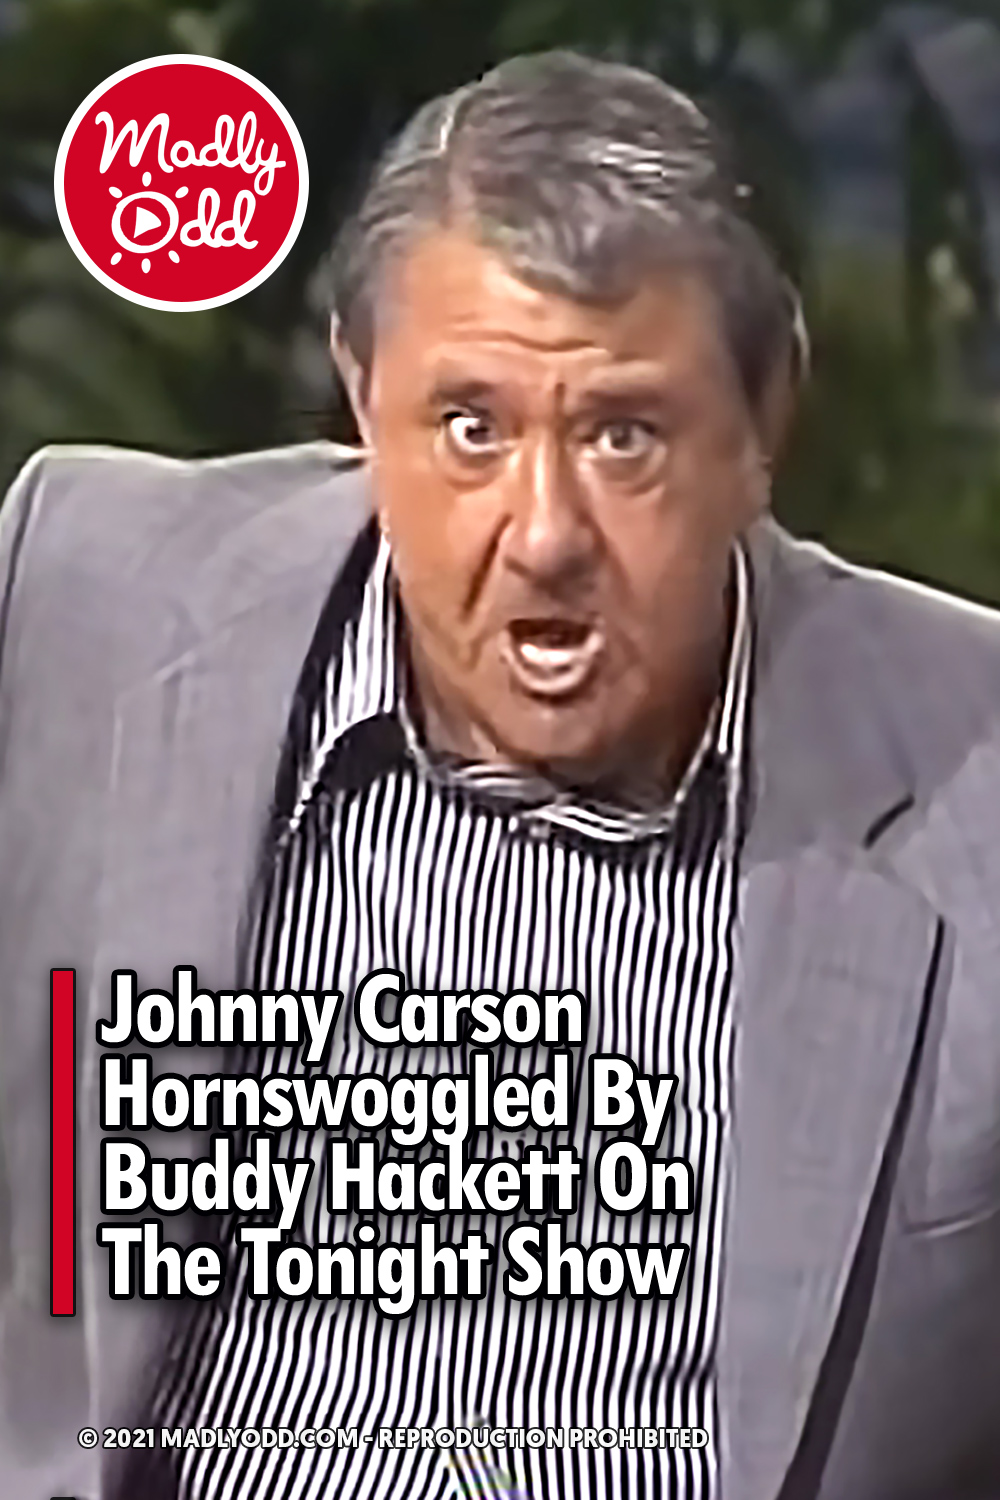 Johnny Carson Hornswoggled By Buddy Hackett On The Tonight Show